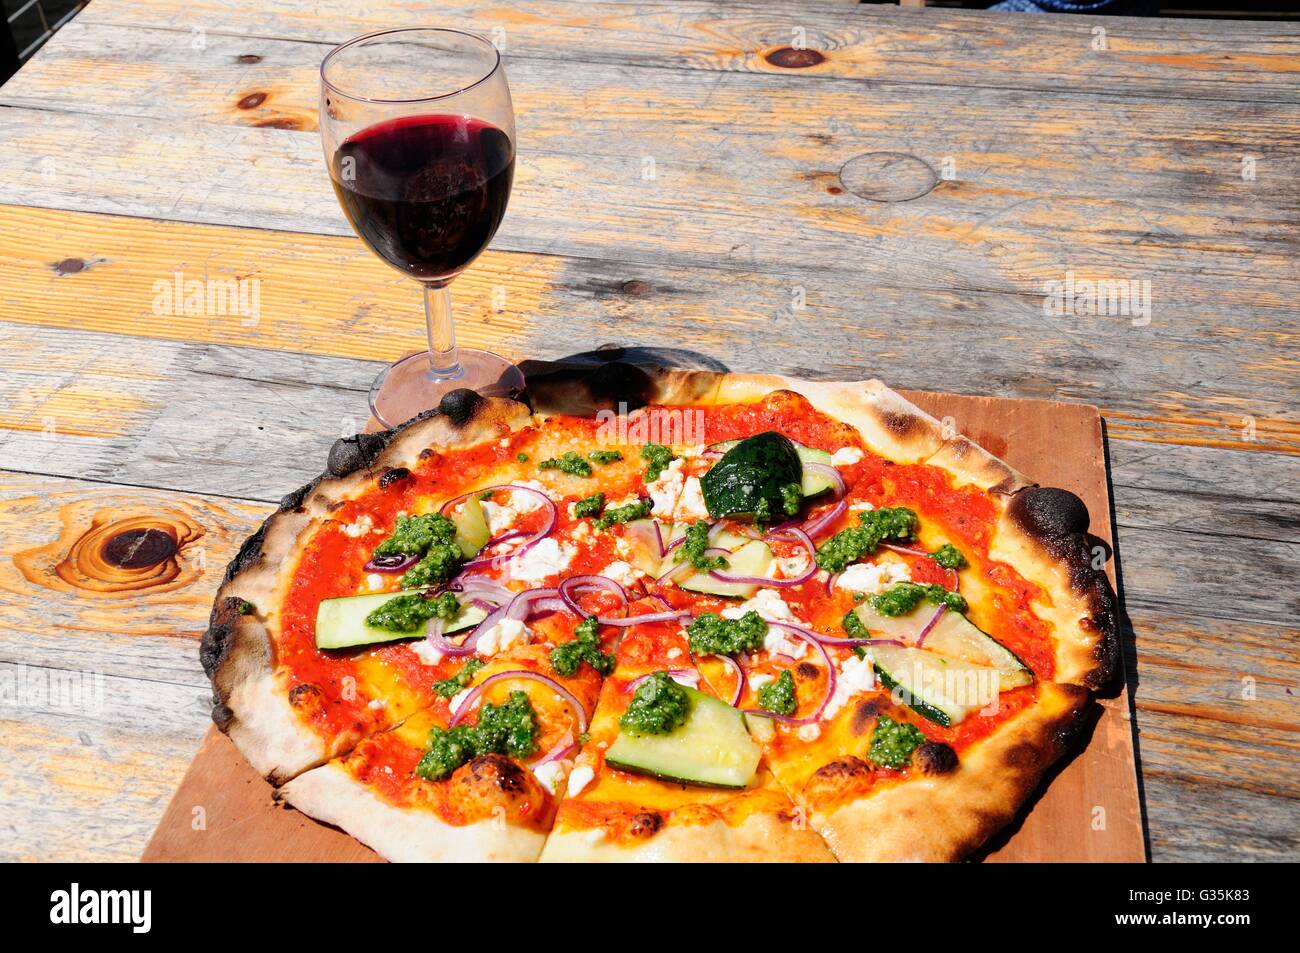 Wood fired vegetarian pizza and a glass of red wine on a rustic wooden table Stock Photo